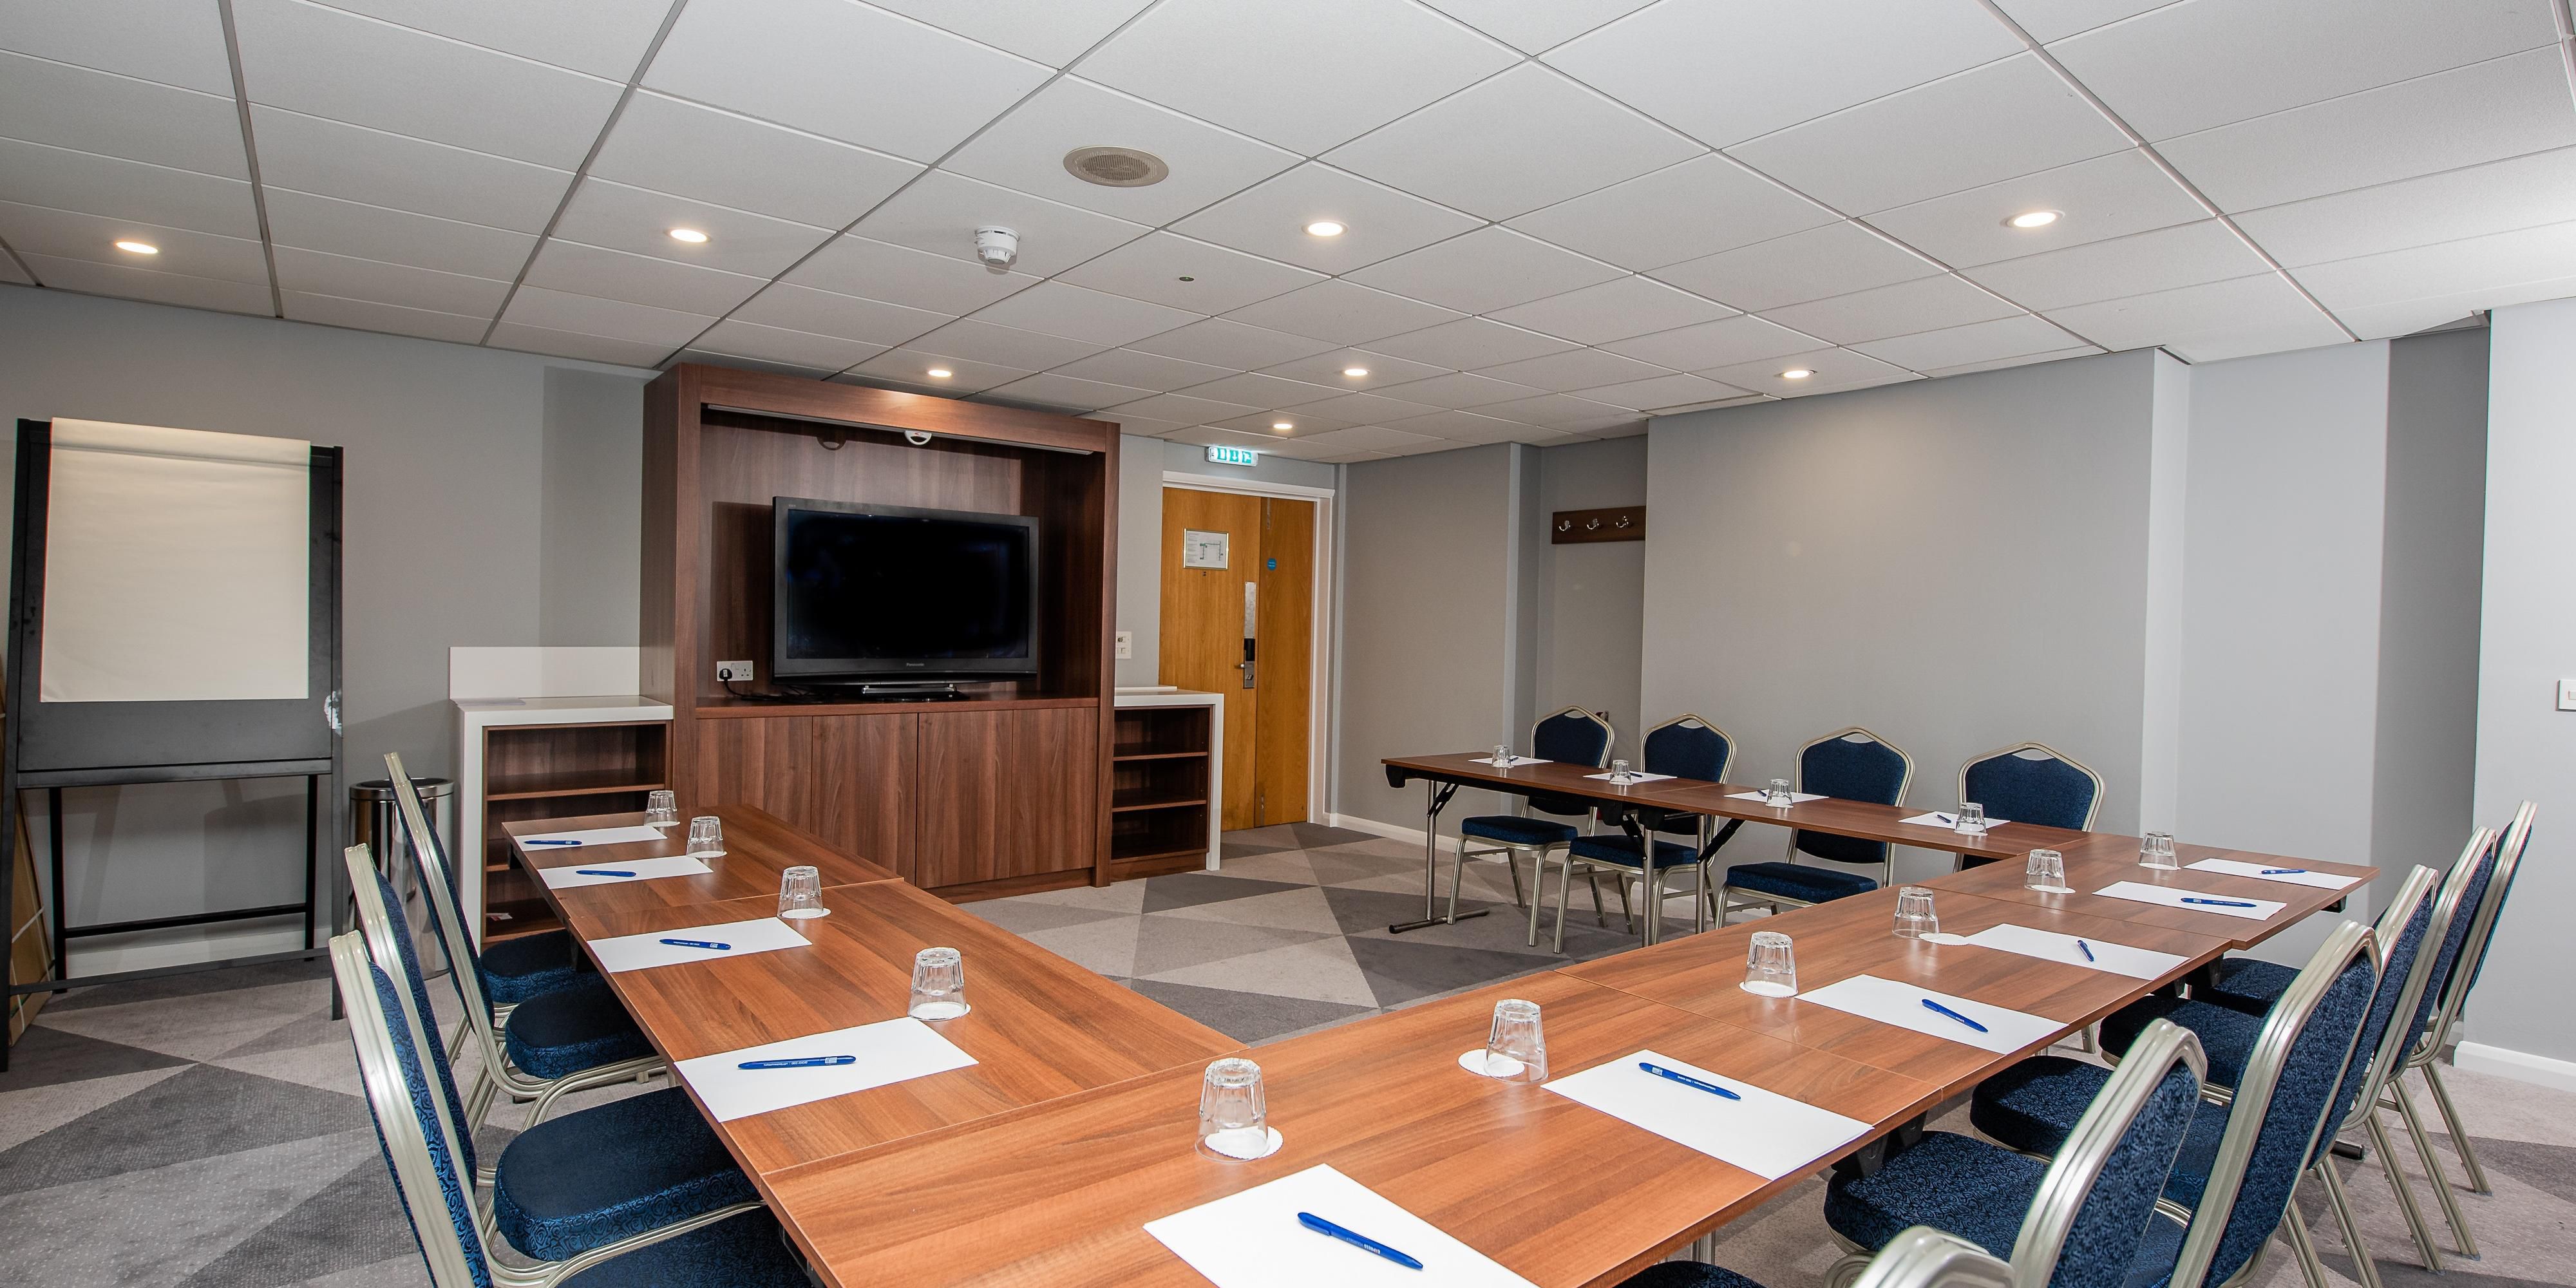 Business visitors can take advantage of the free WiFi to catch up on work, with tea or coffee from the hotel bar. The light-filled Great Room or our meeting rooms will be the ideal location to hold informal meetings with clients or colleagues in comfy surroundings.